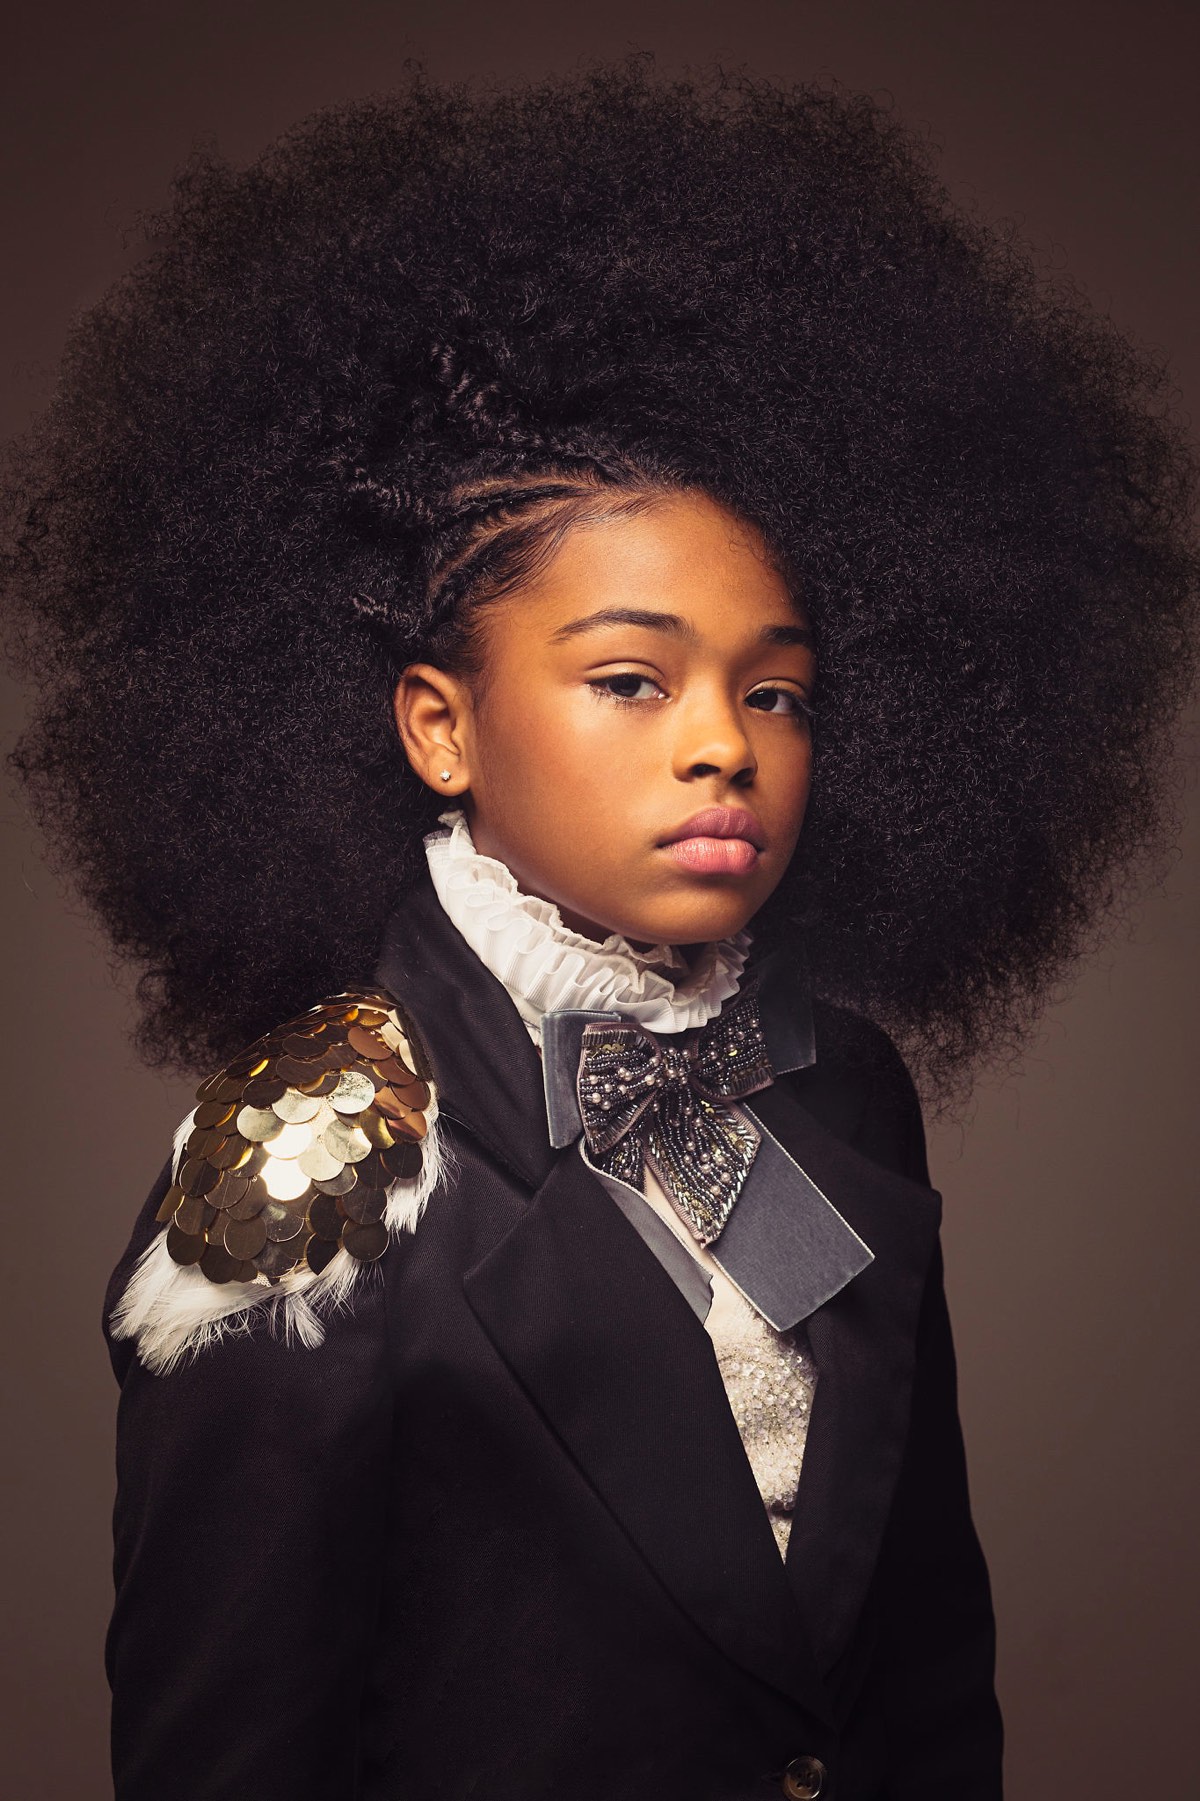 Afroart Fantastic Portraits Of African American Kids With Unique Natural Hairstyles